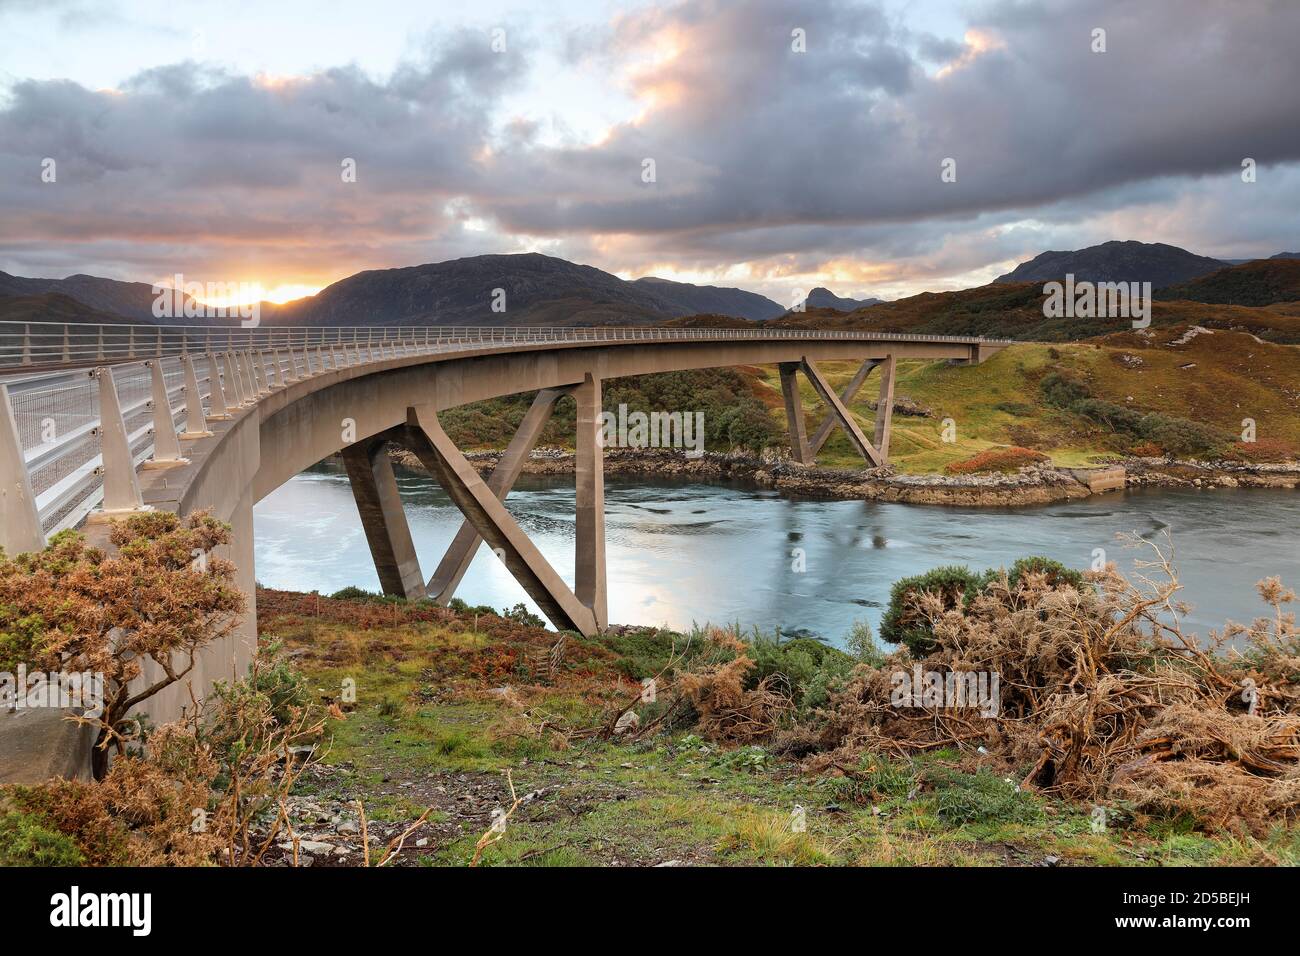 The Kylesku Bridge on North Coast 500 Tourist Route which Spans the Sea Loch of Caolas Cumhann, Sutherland, NW Highlands of Scotland, UK Stock Photo